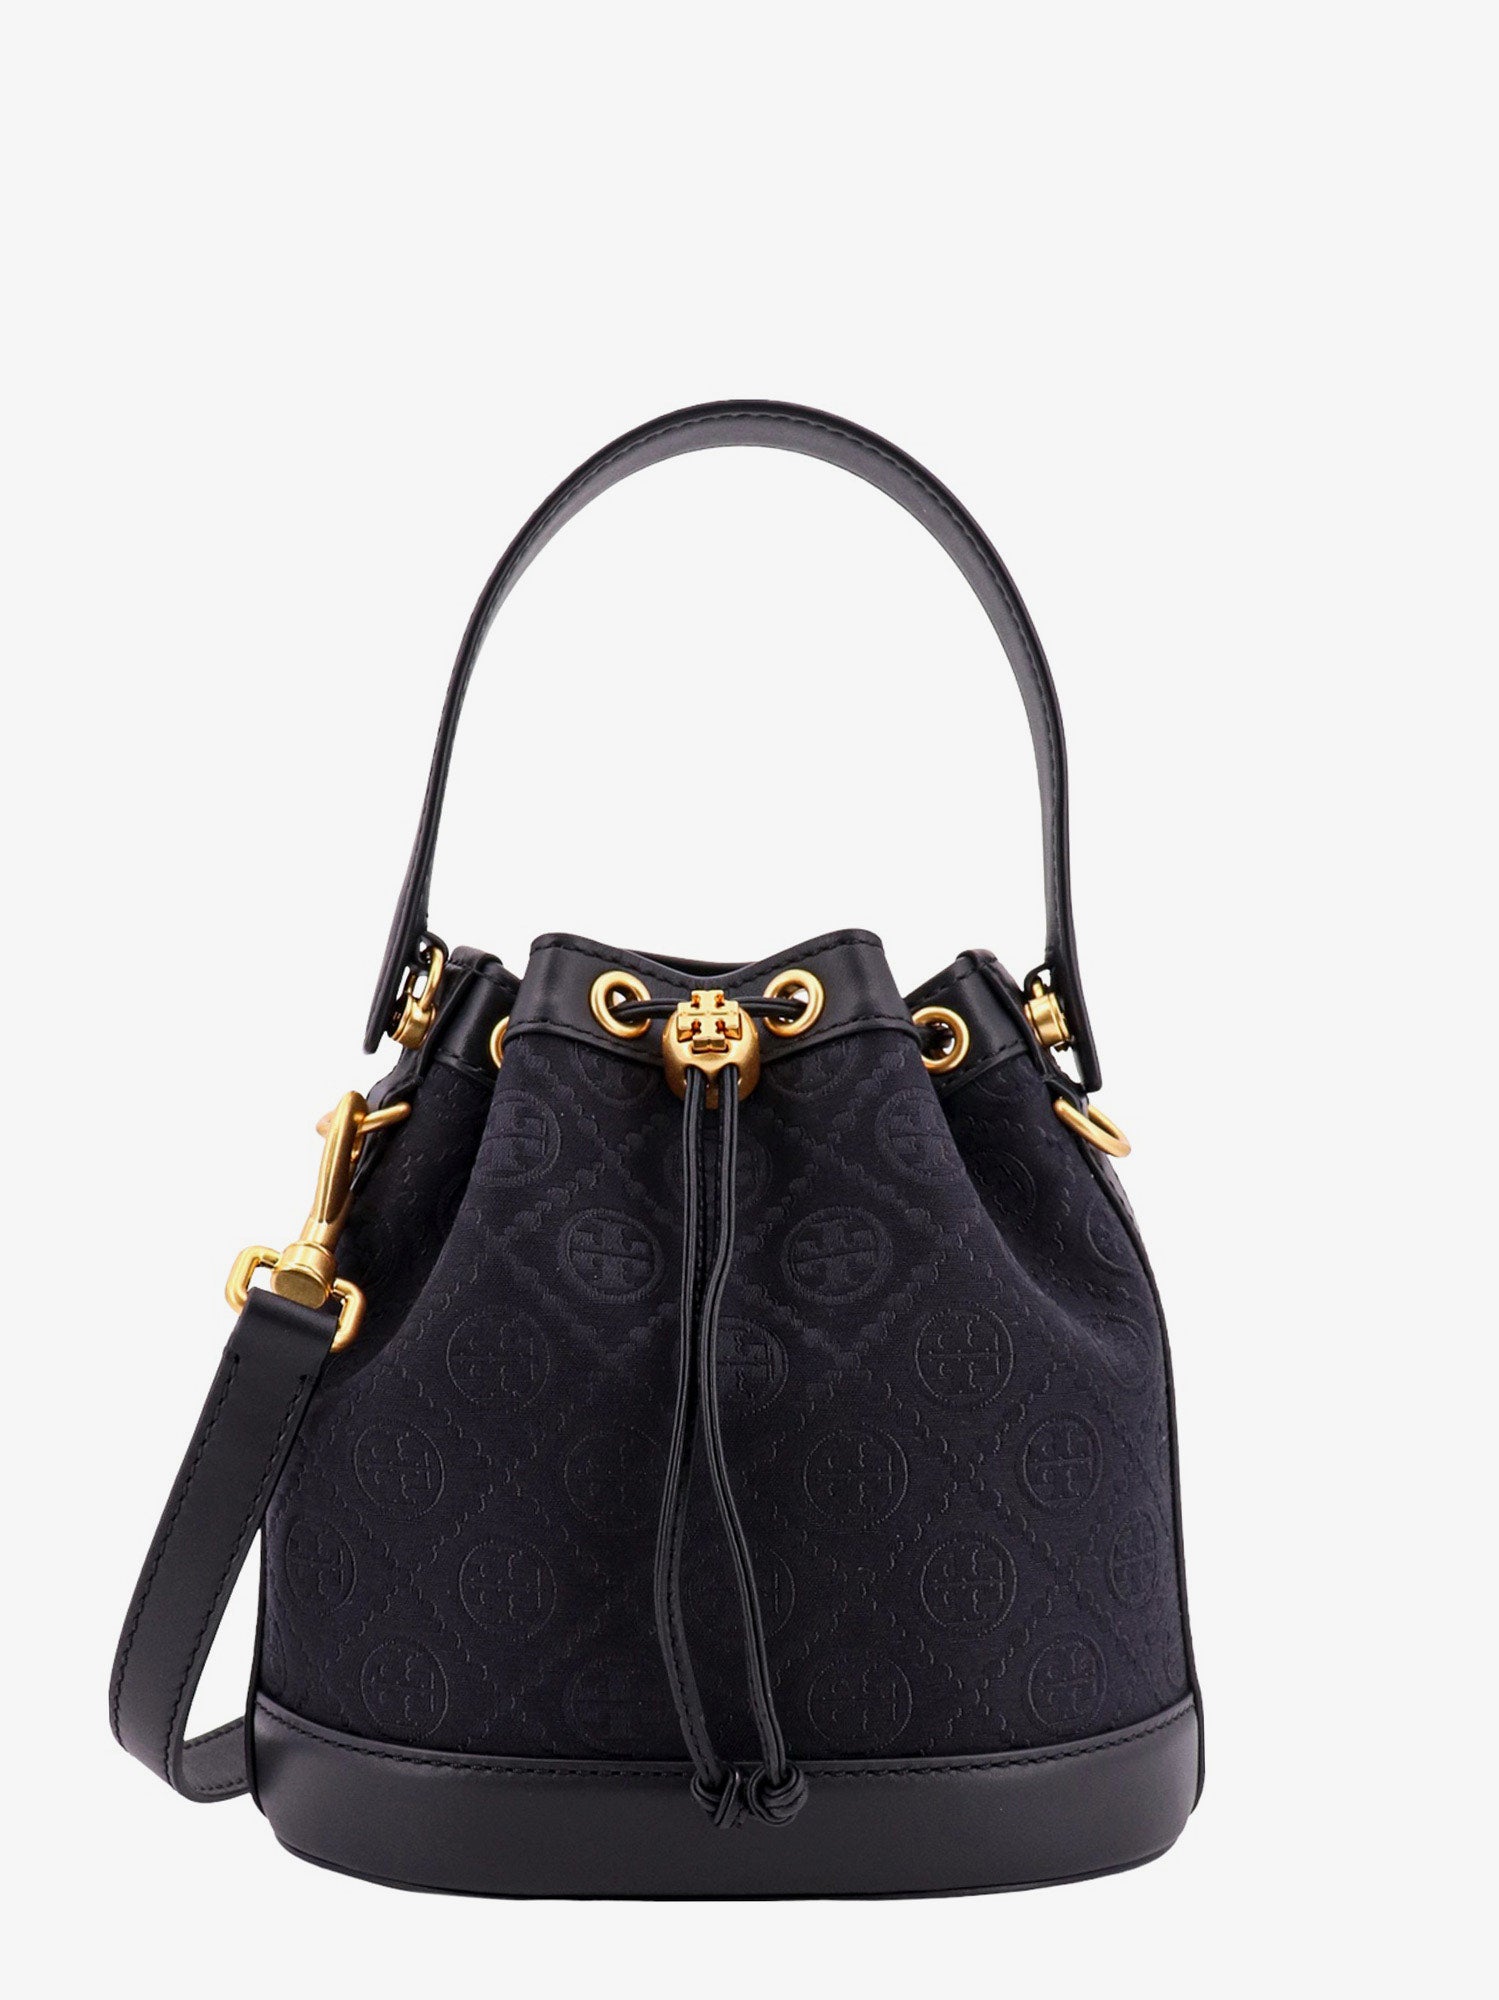 Tory Burch Bucket Bags, The best prices online in Malaysia